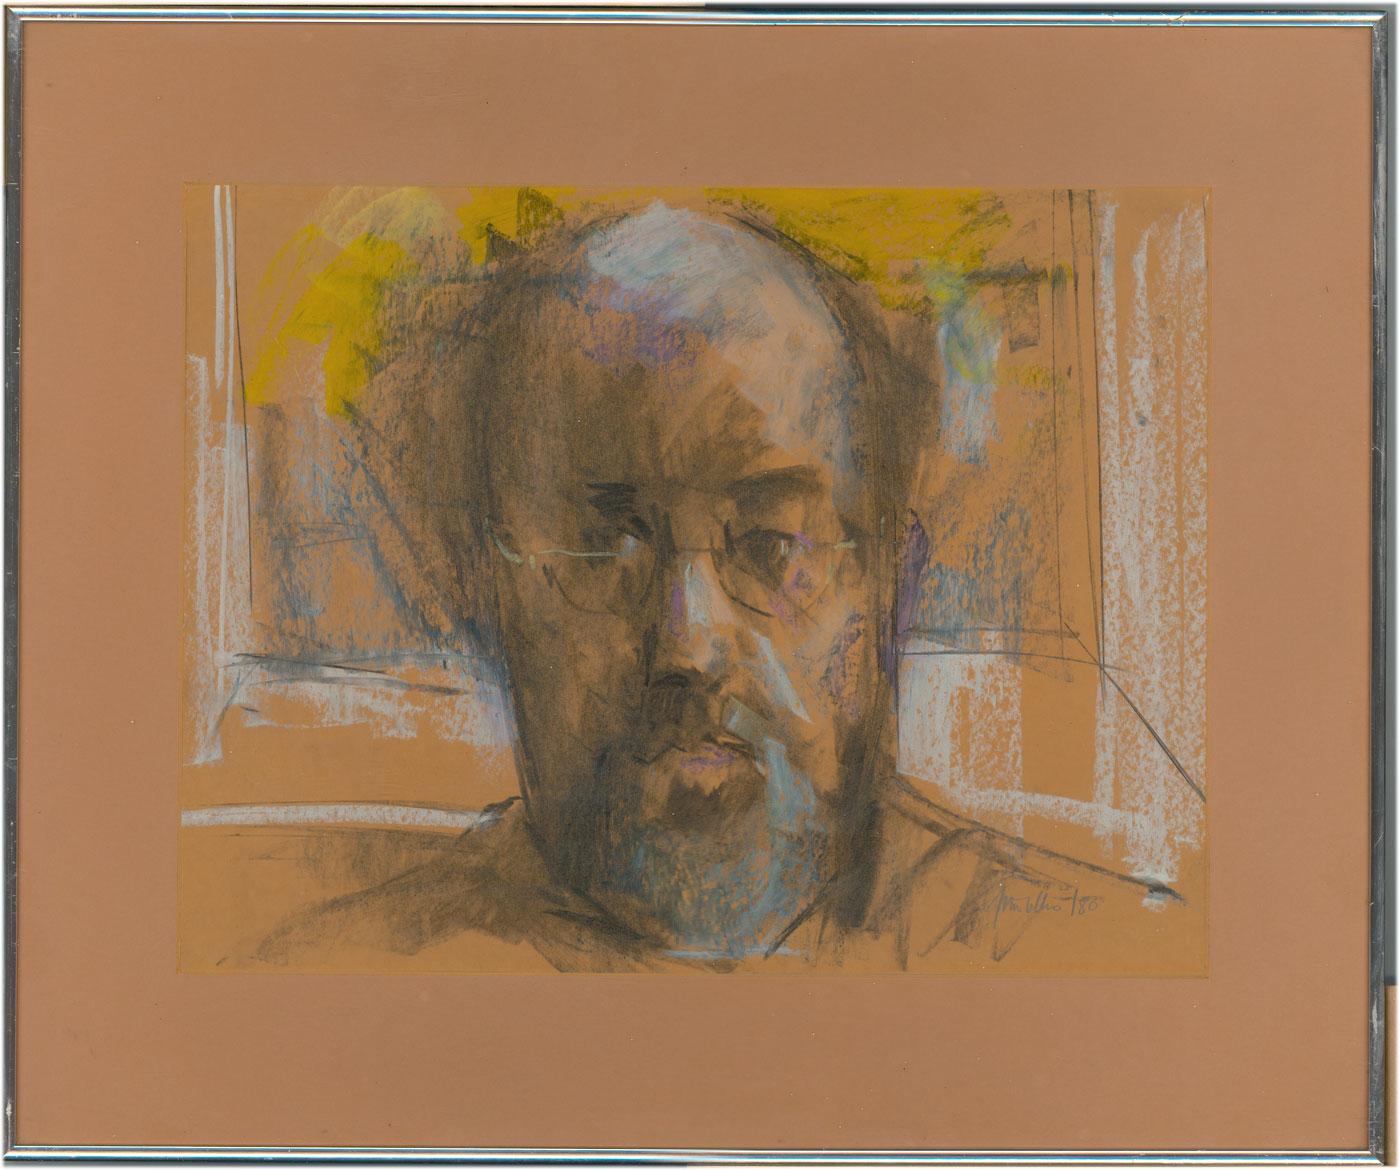 Peter Collins ARCA - Signed and Framed Original 1980 Pastel. Pastel with charcoal. Presented in a card mount and metallic frame. Further signed and title inscribed on the reverse. Signed and dated. On wove. Some wear to the frame but overall in fine